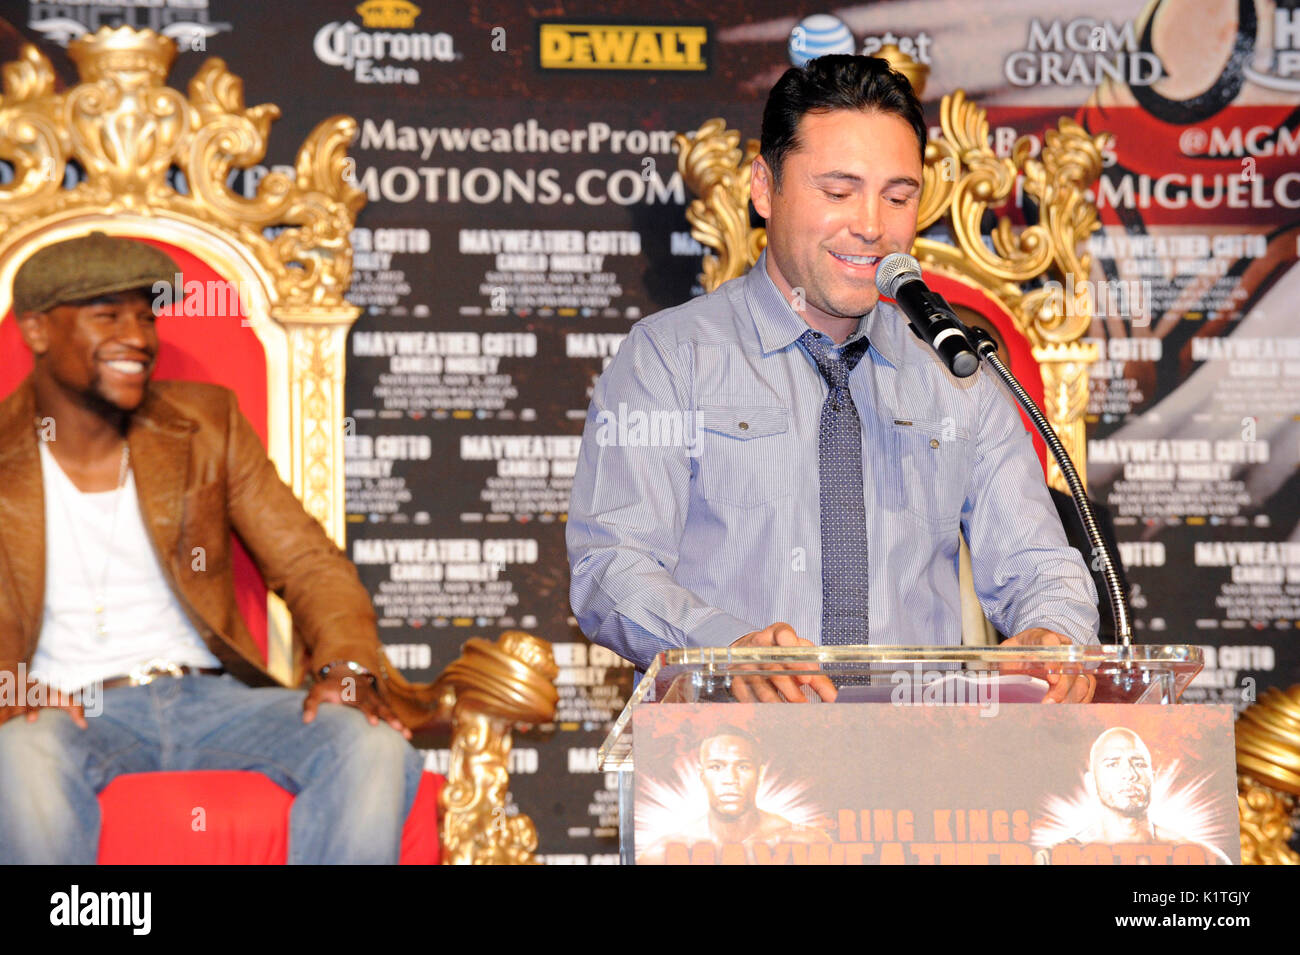 (L-R) Boxers Floyd Mayweather Oscar De La Hoya attend press conference Grauman's Chinese Theatre Hollywood March 1,2012. Mayweather Cotto will meet WBA Super Welterweight World Championship fight May 5 MGM Grand Las Vegas. Stock Photo